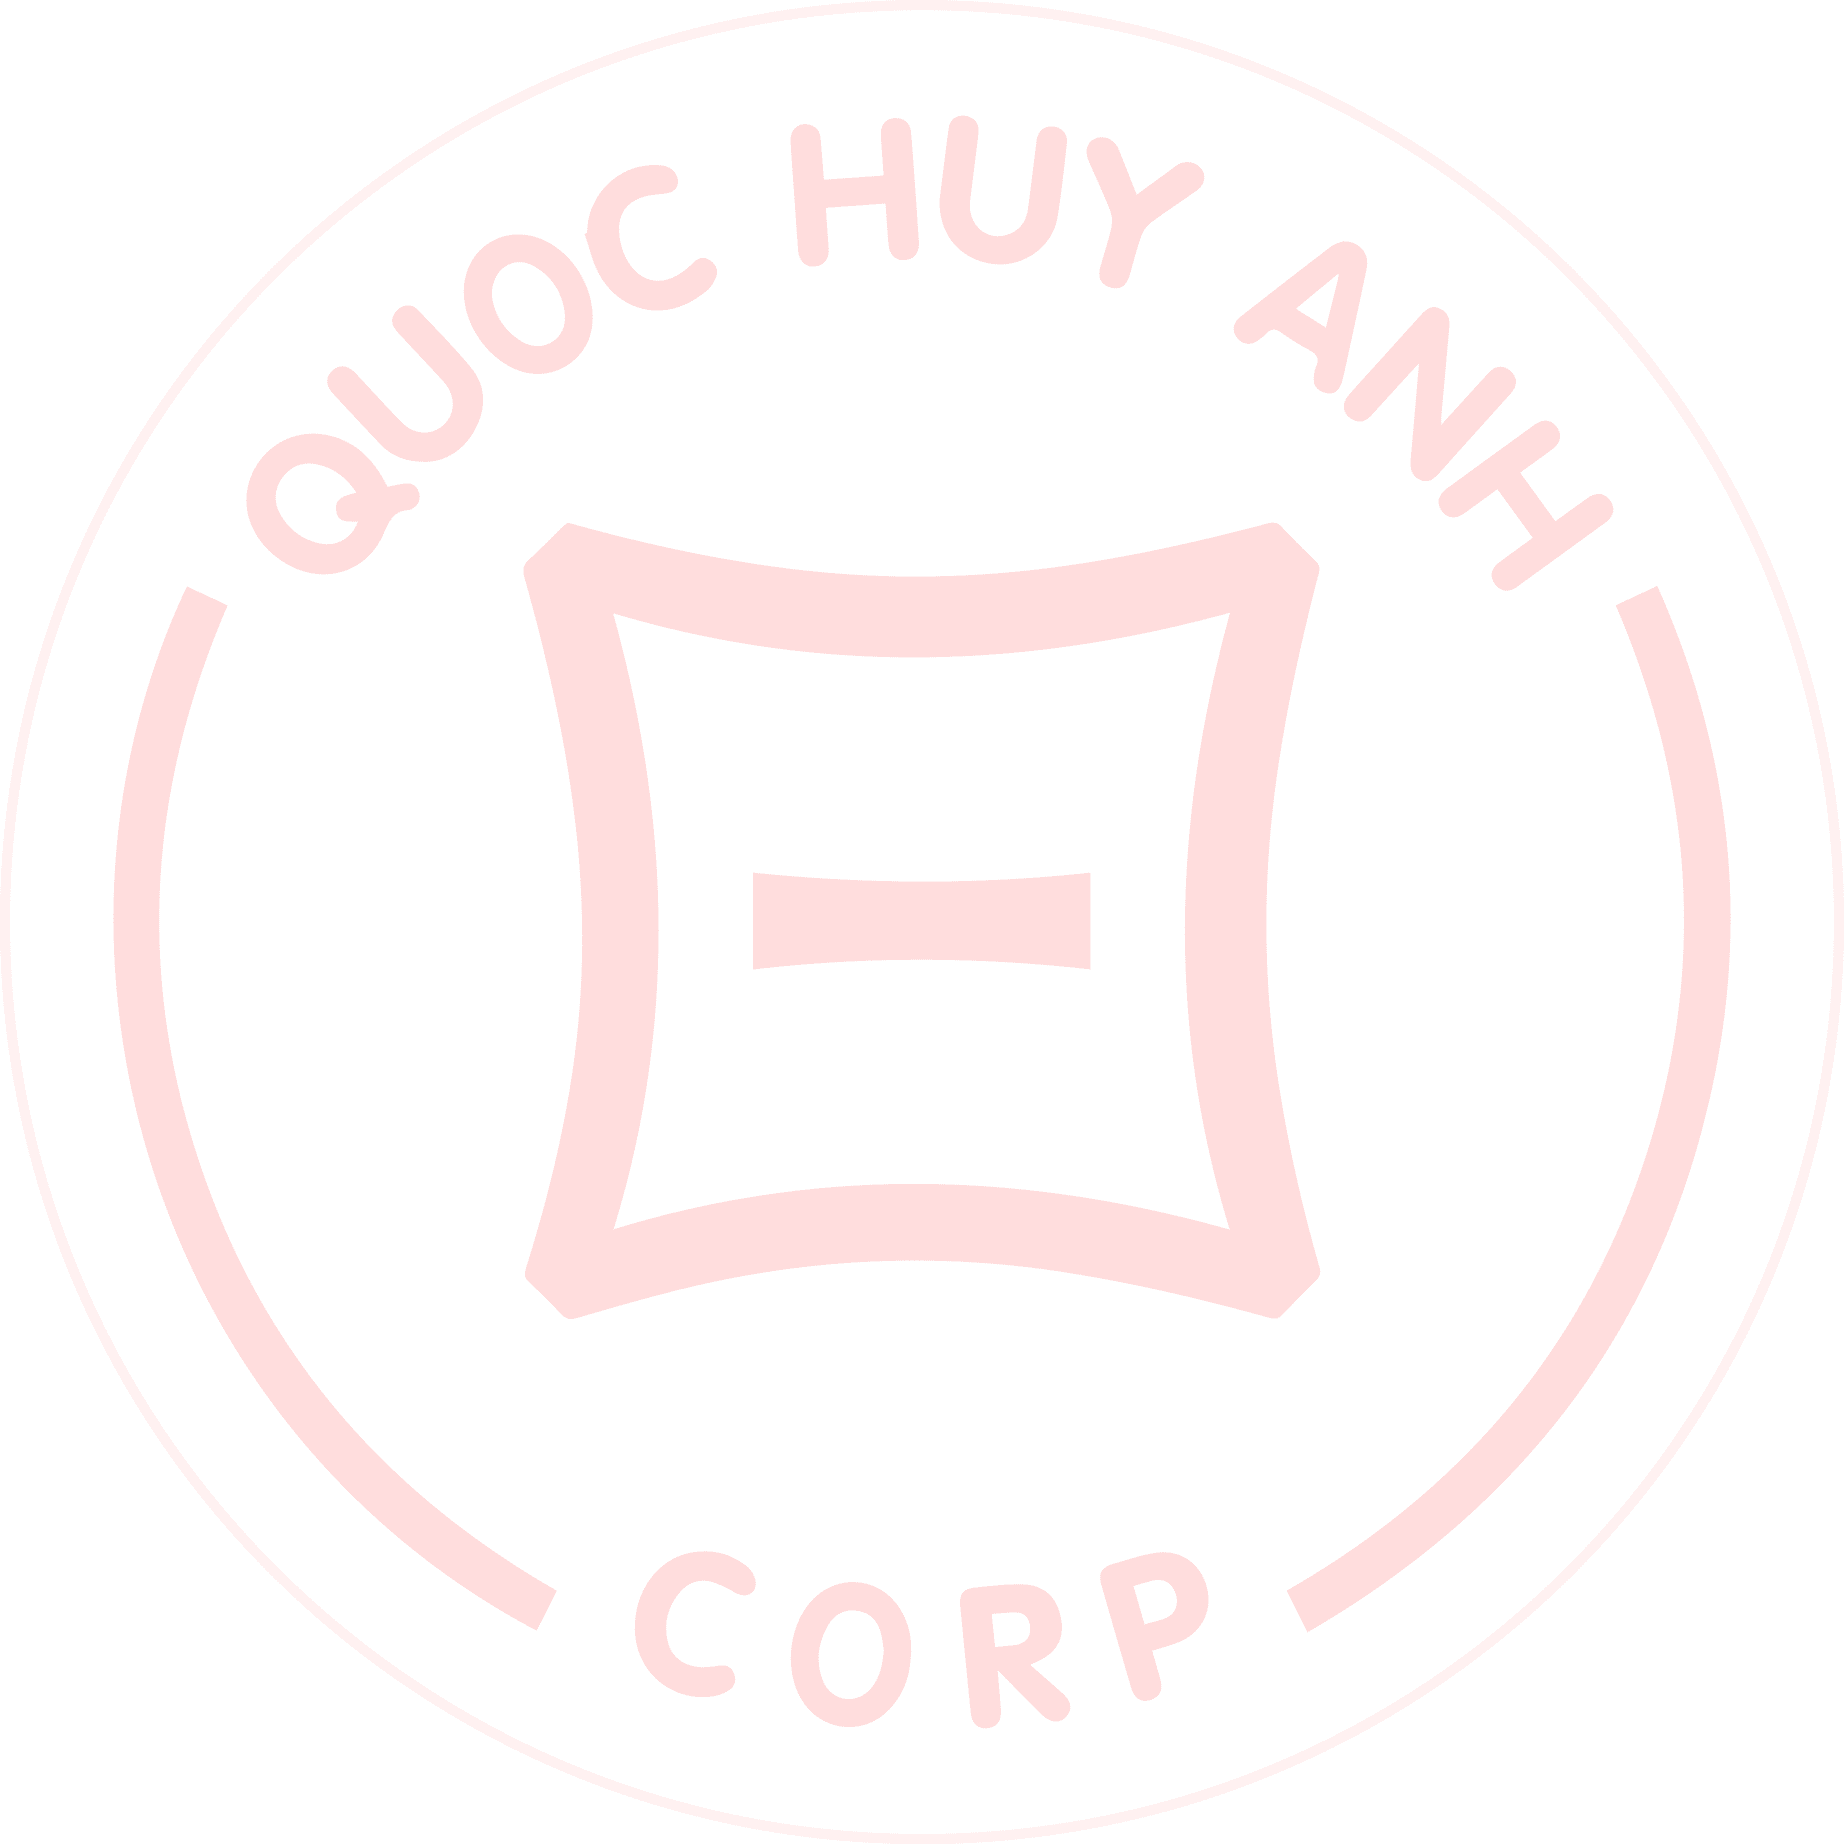 logo quoc huy anh